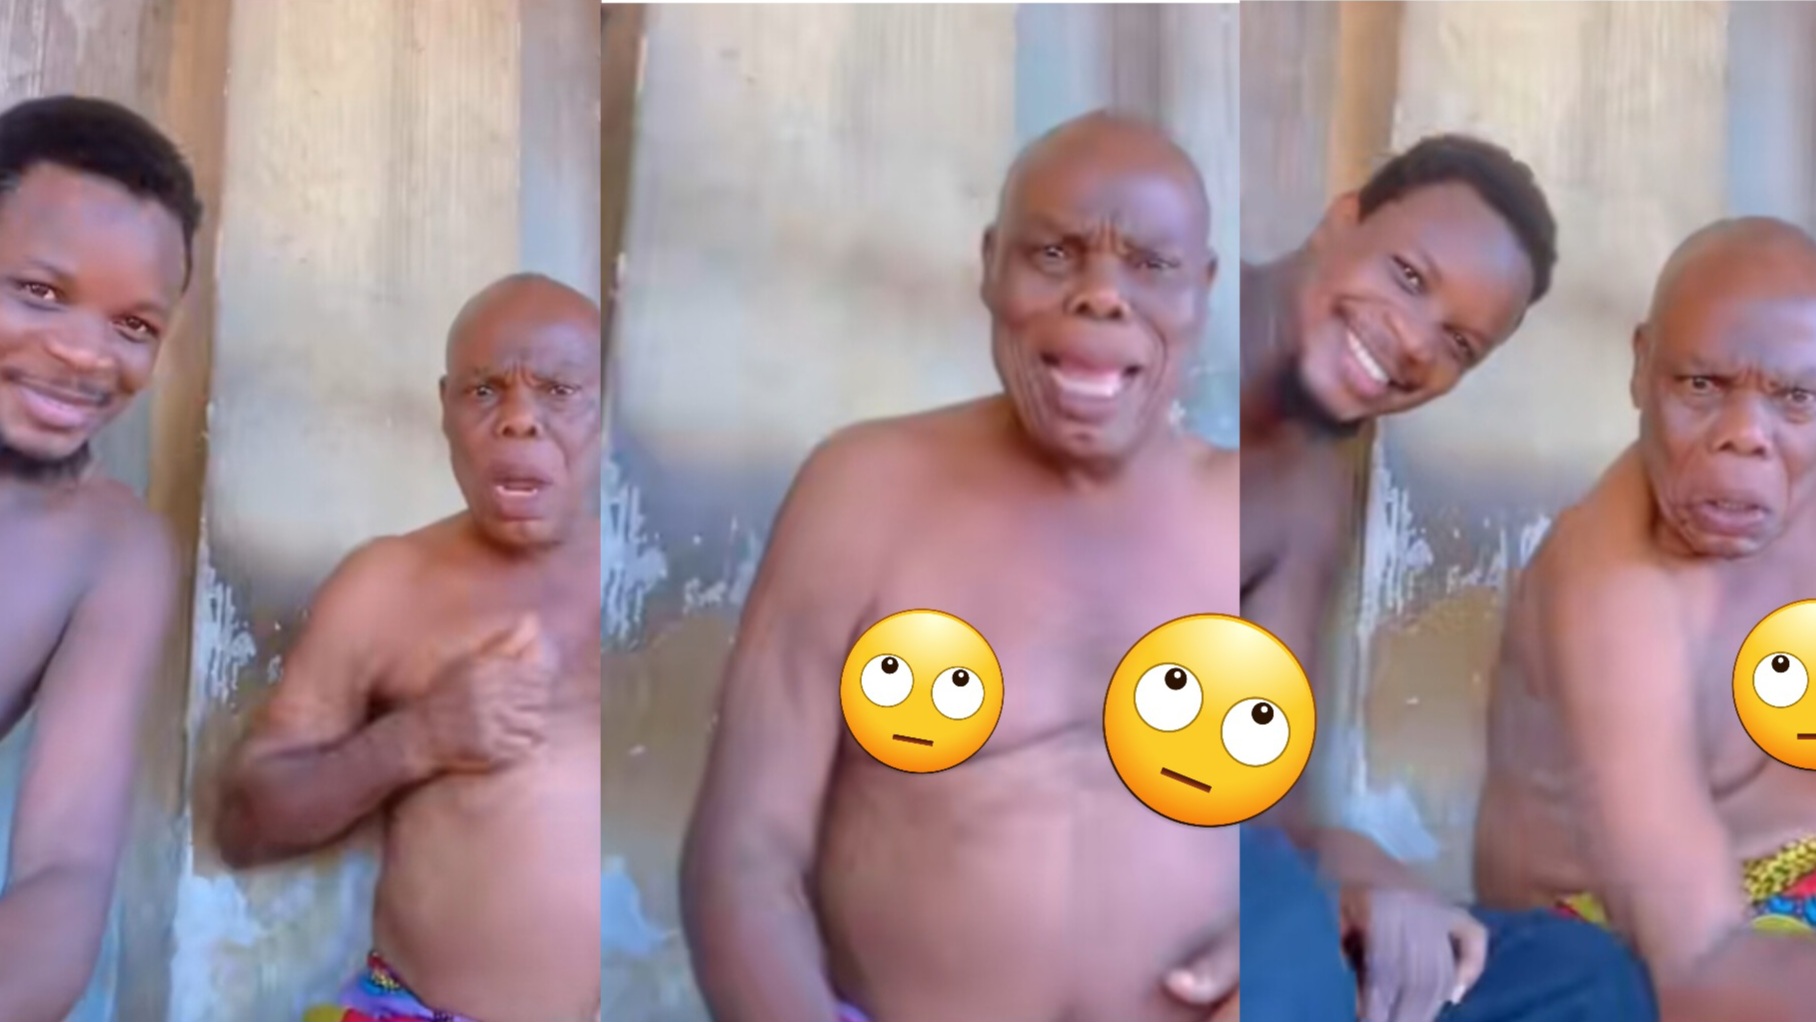 A man show about his dad's reaction to seeing himself on front camera for first time (Video)